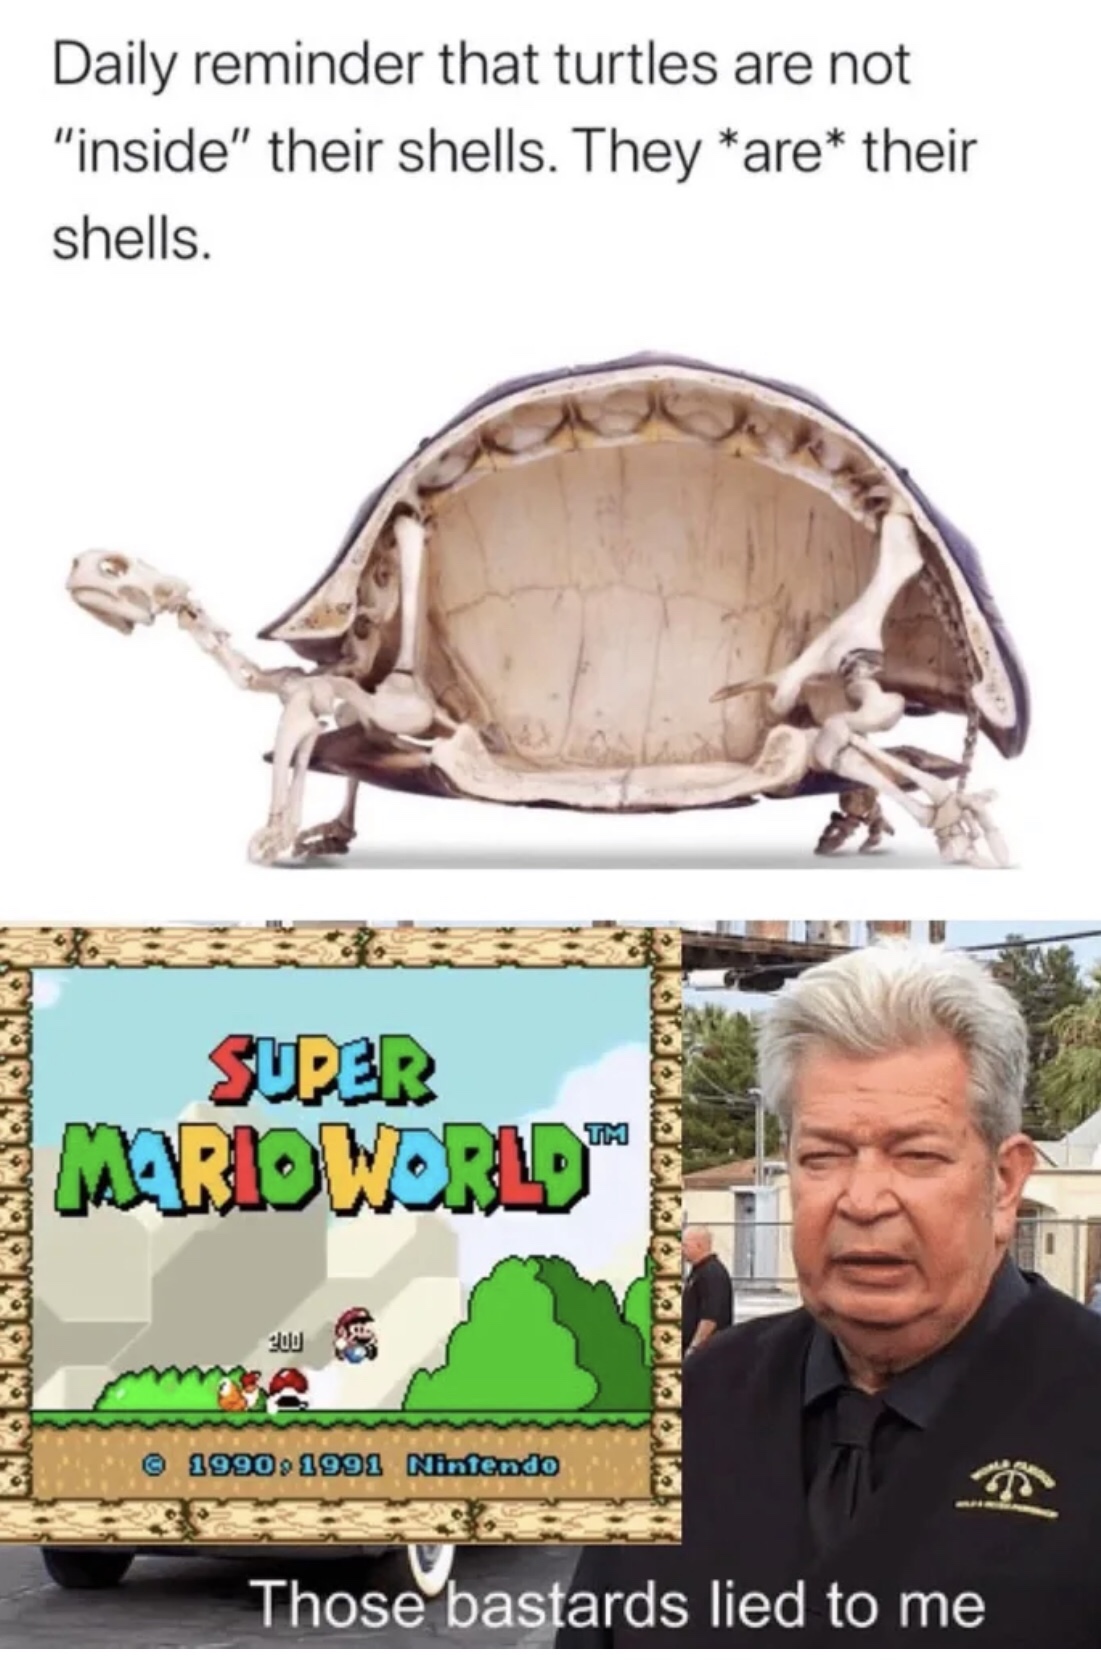 tortoise anatomy - Daily reminder that turtles are not "inside" their shells. They are their shells. D Super Mario World Tm 200 etaliata 1. 19901991 Nintendo Those bastards lied to me